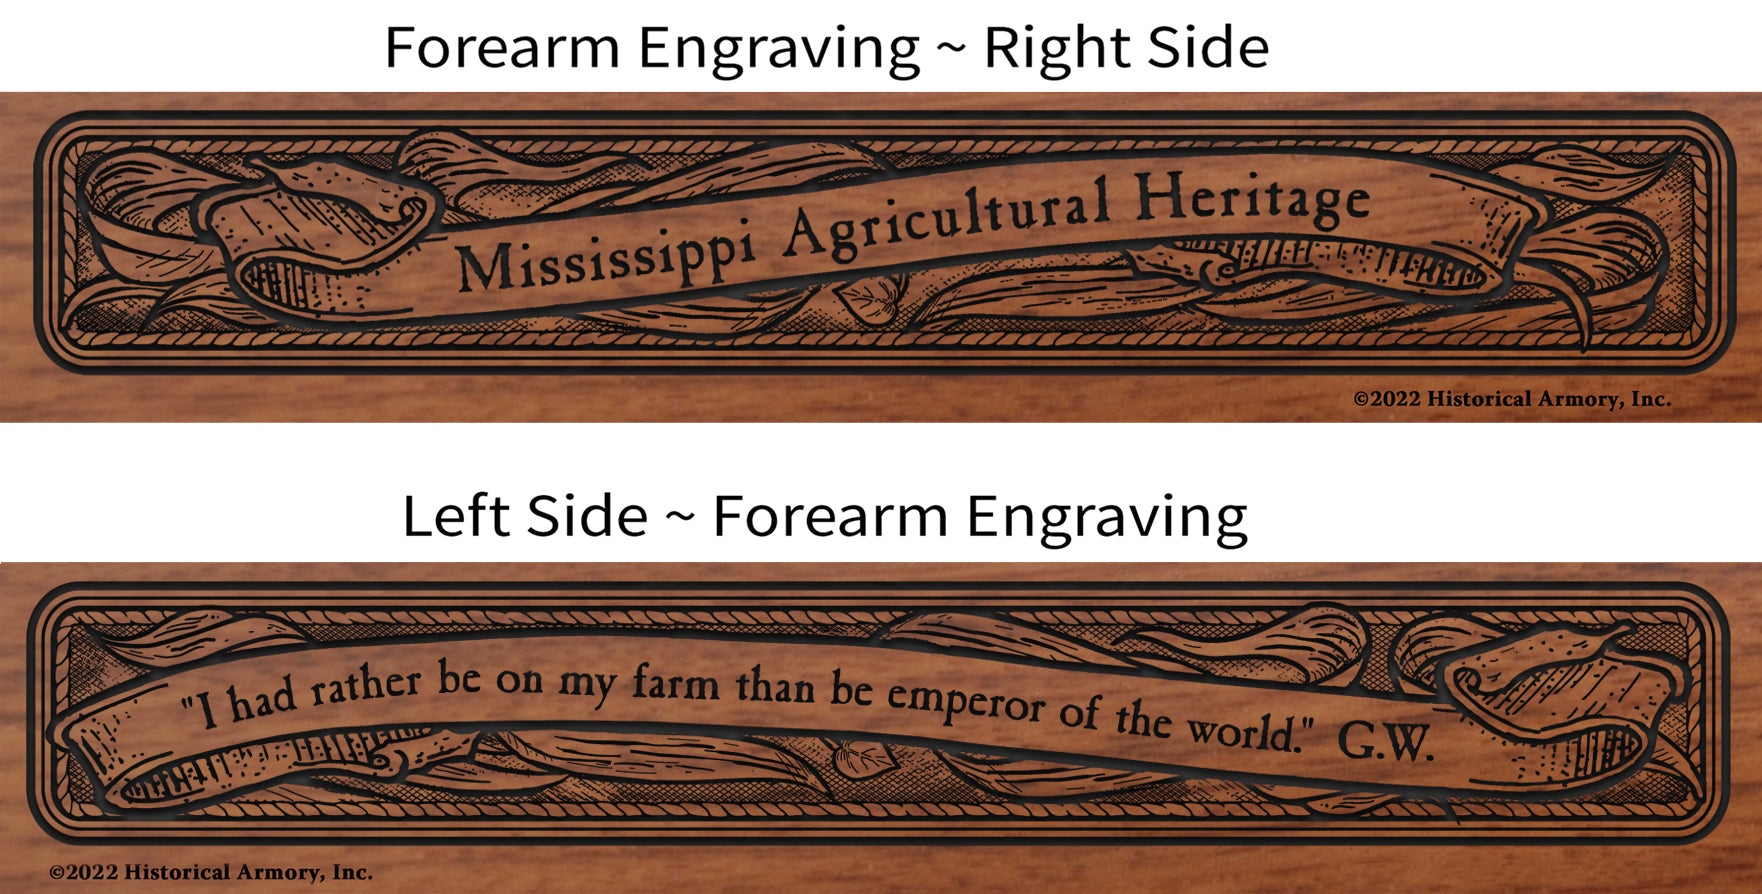 Mississippi Agricultural Heritage Engraved Rifle Forearm